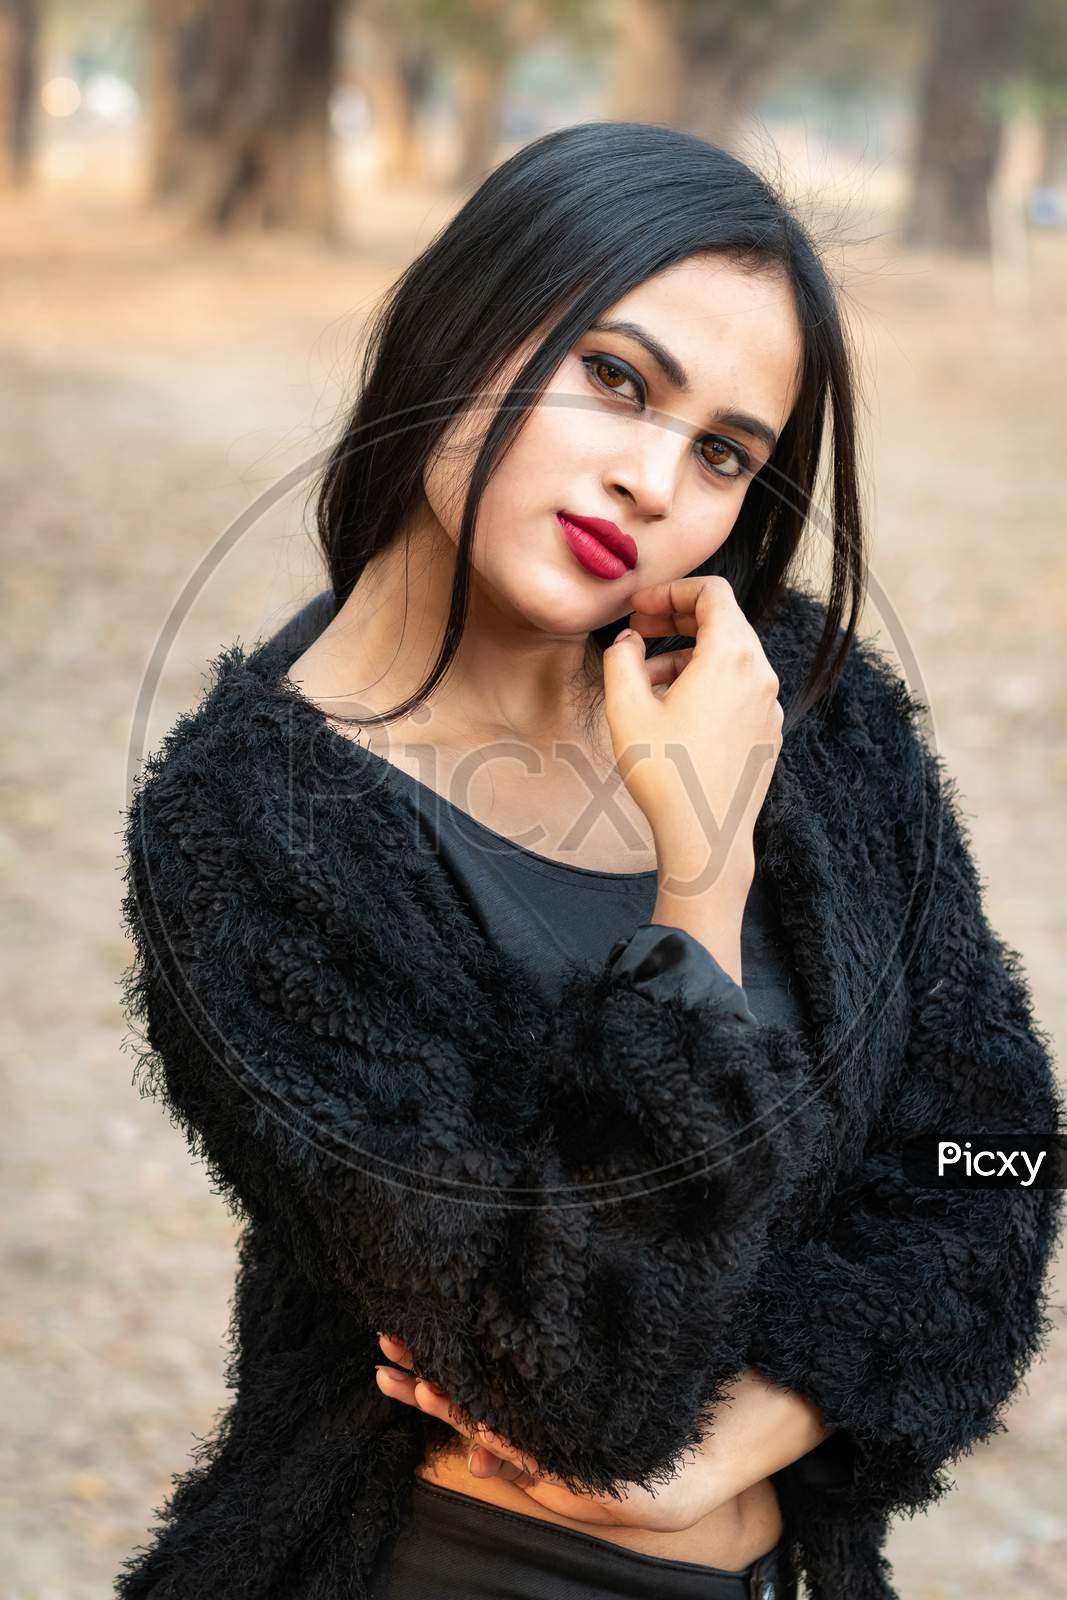 Portrait Of Very Beautiful Young Attractive Brunette Indian Woman Wearing Black Outfit Posing Fashionable In A Blurred Background. Lifestyle And Fashion.